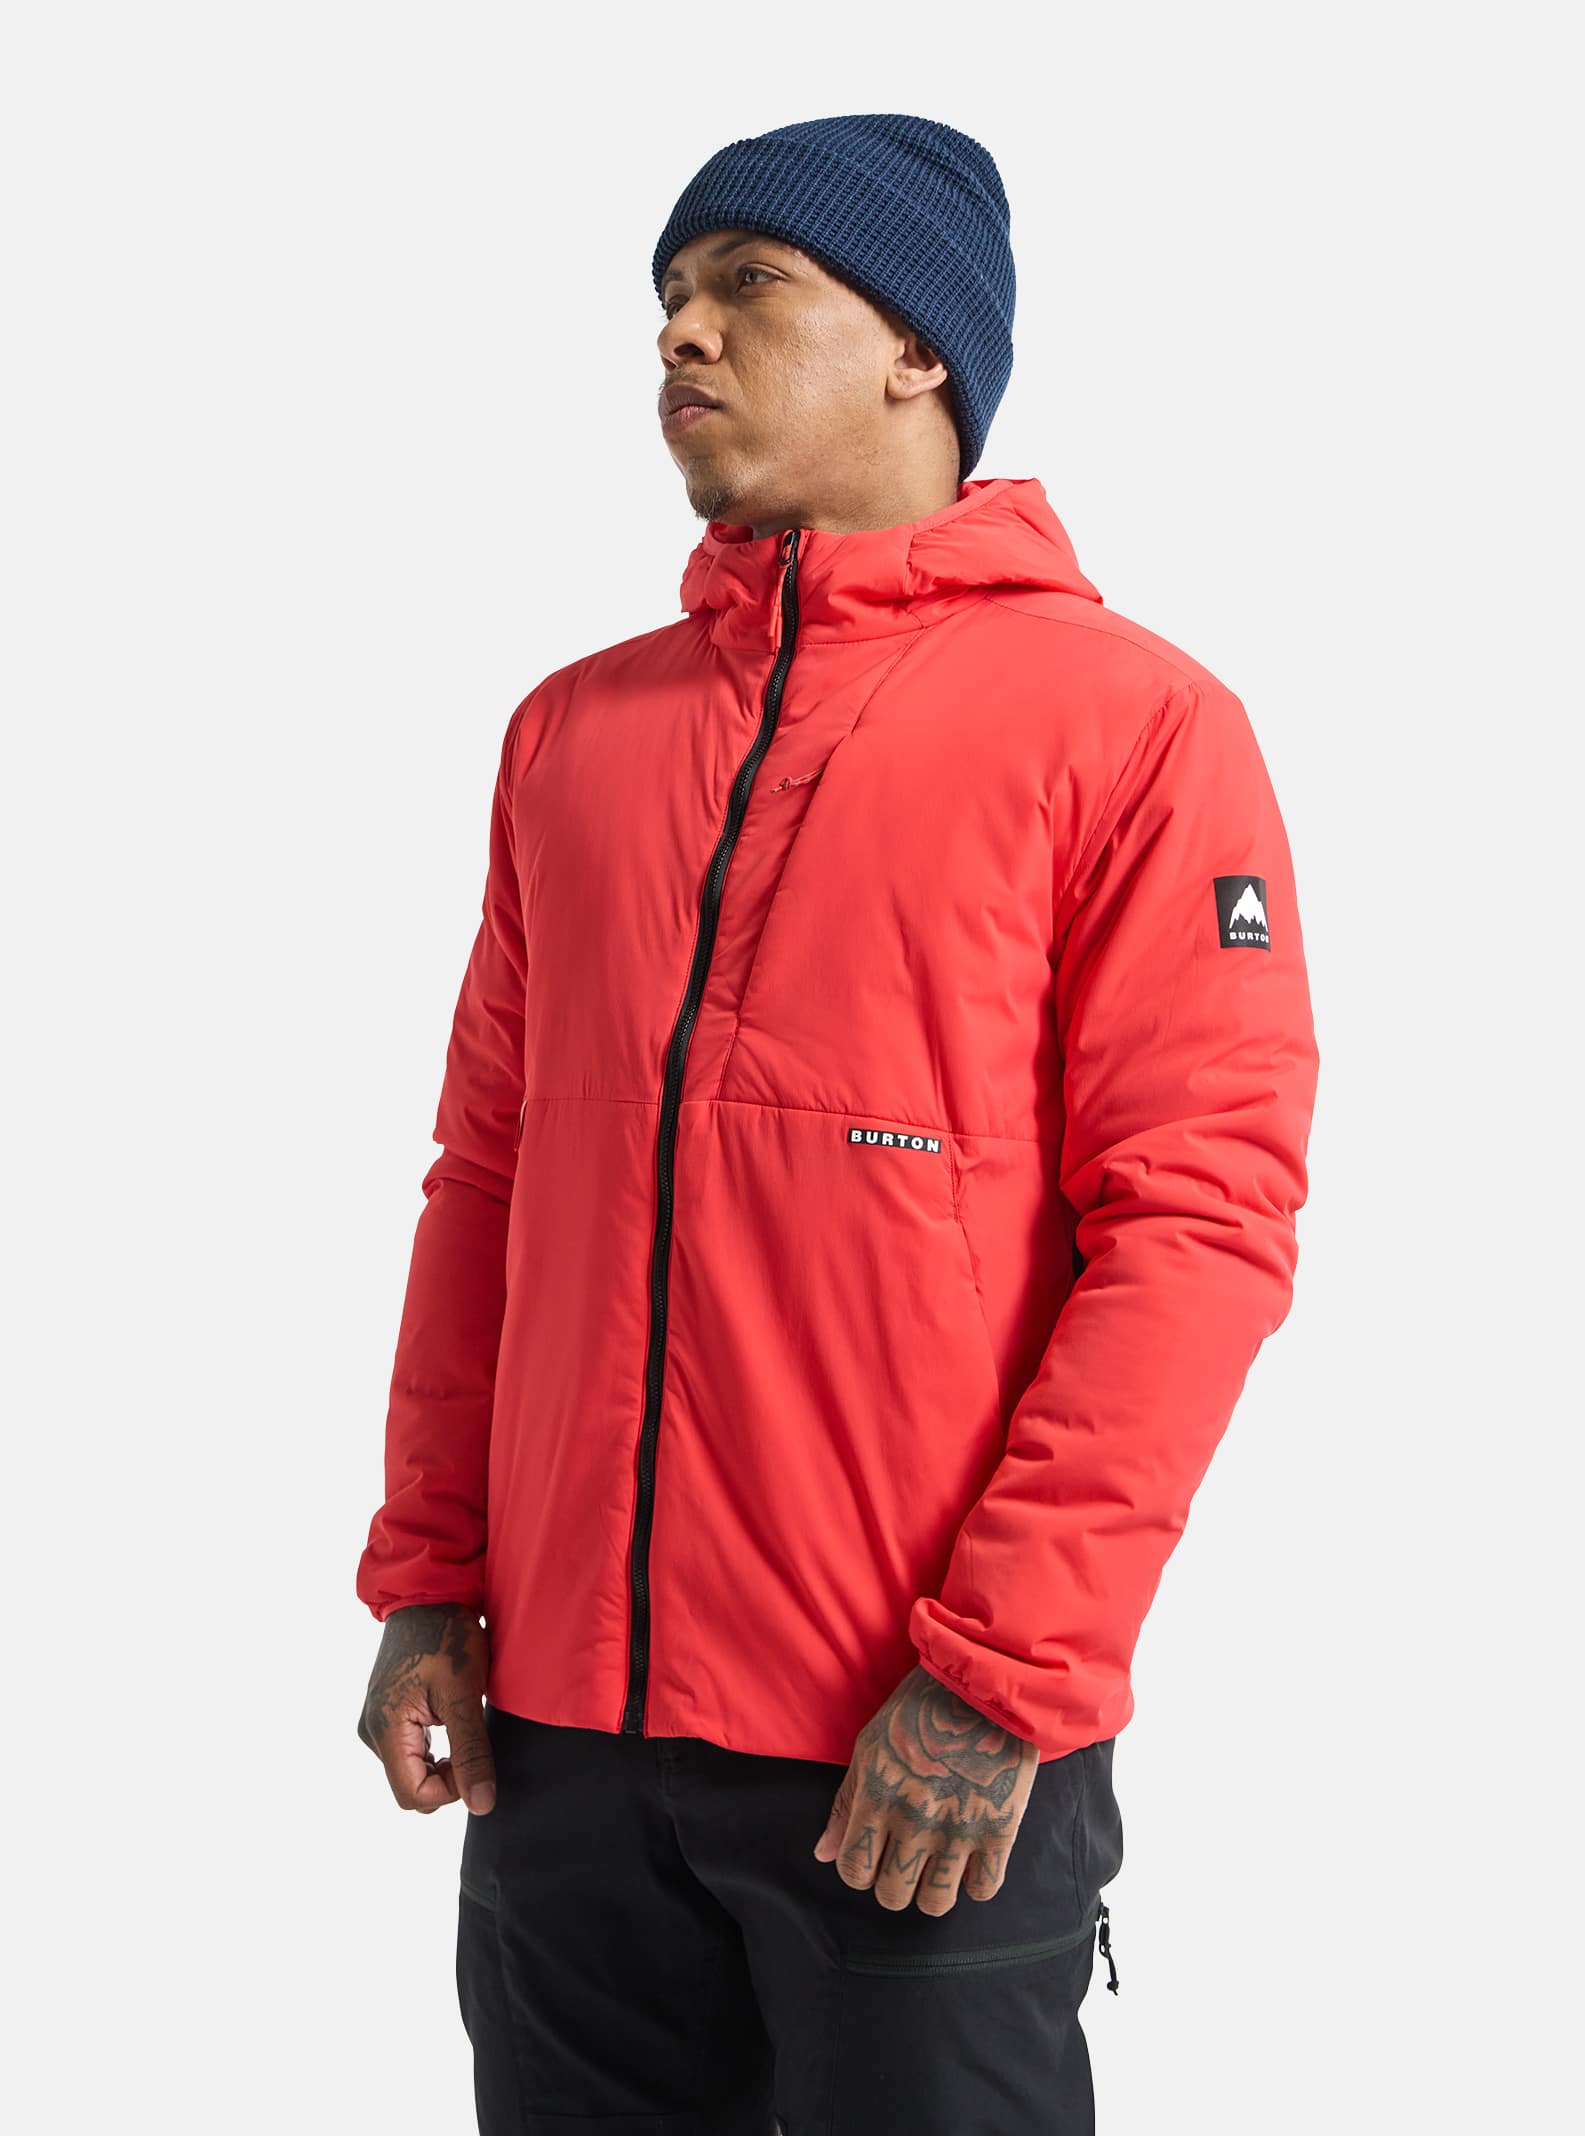 Burtonmens Outerwear 42% Off! Multipath Hooded Insulated Jacket most ...